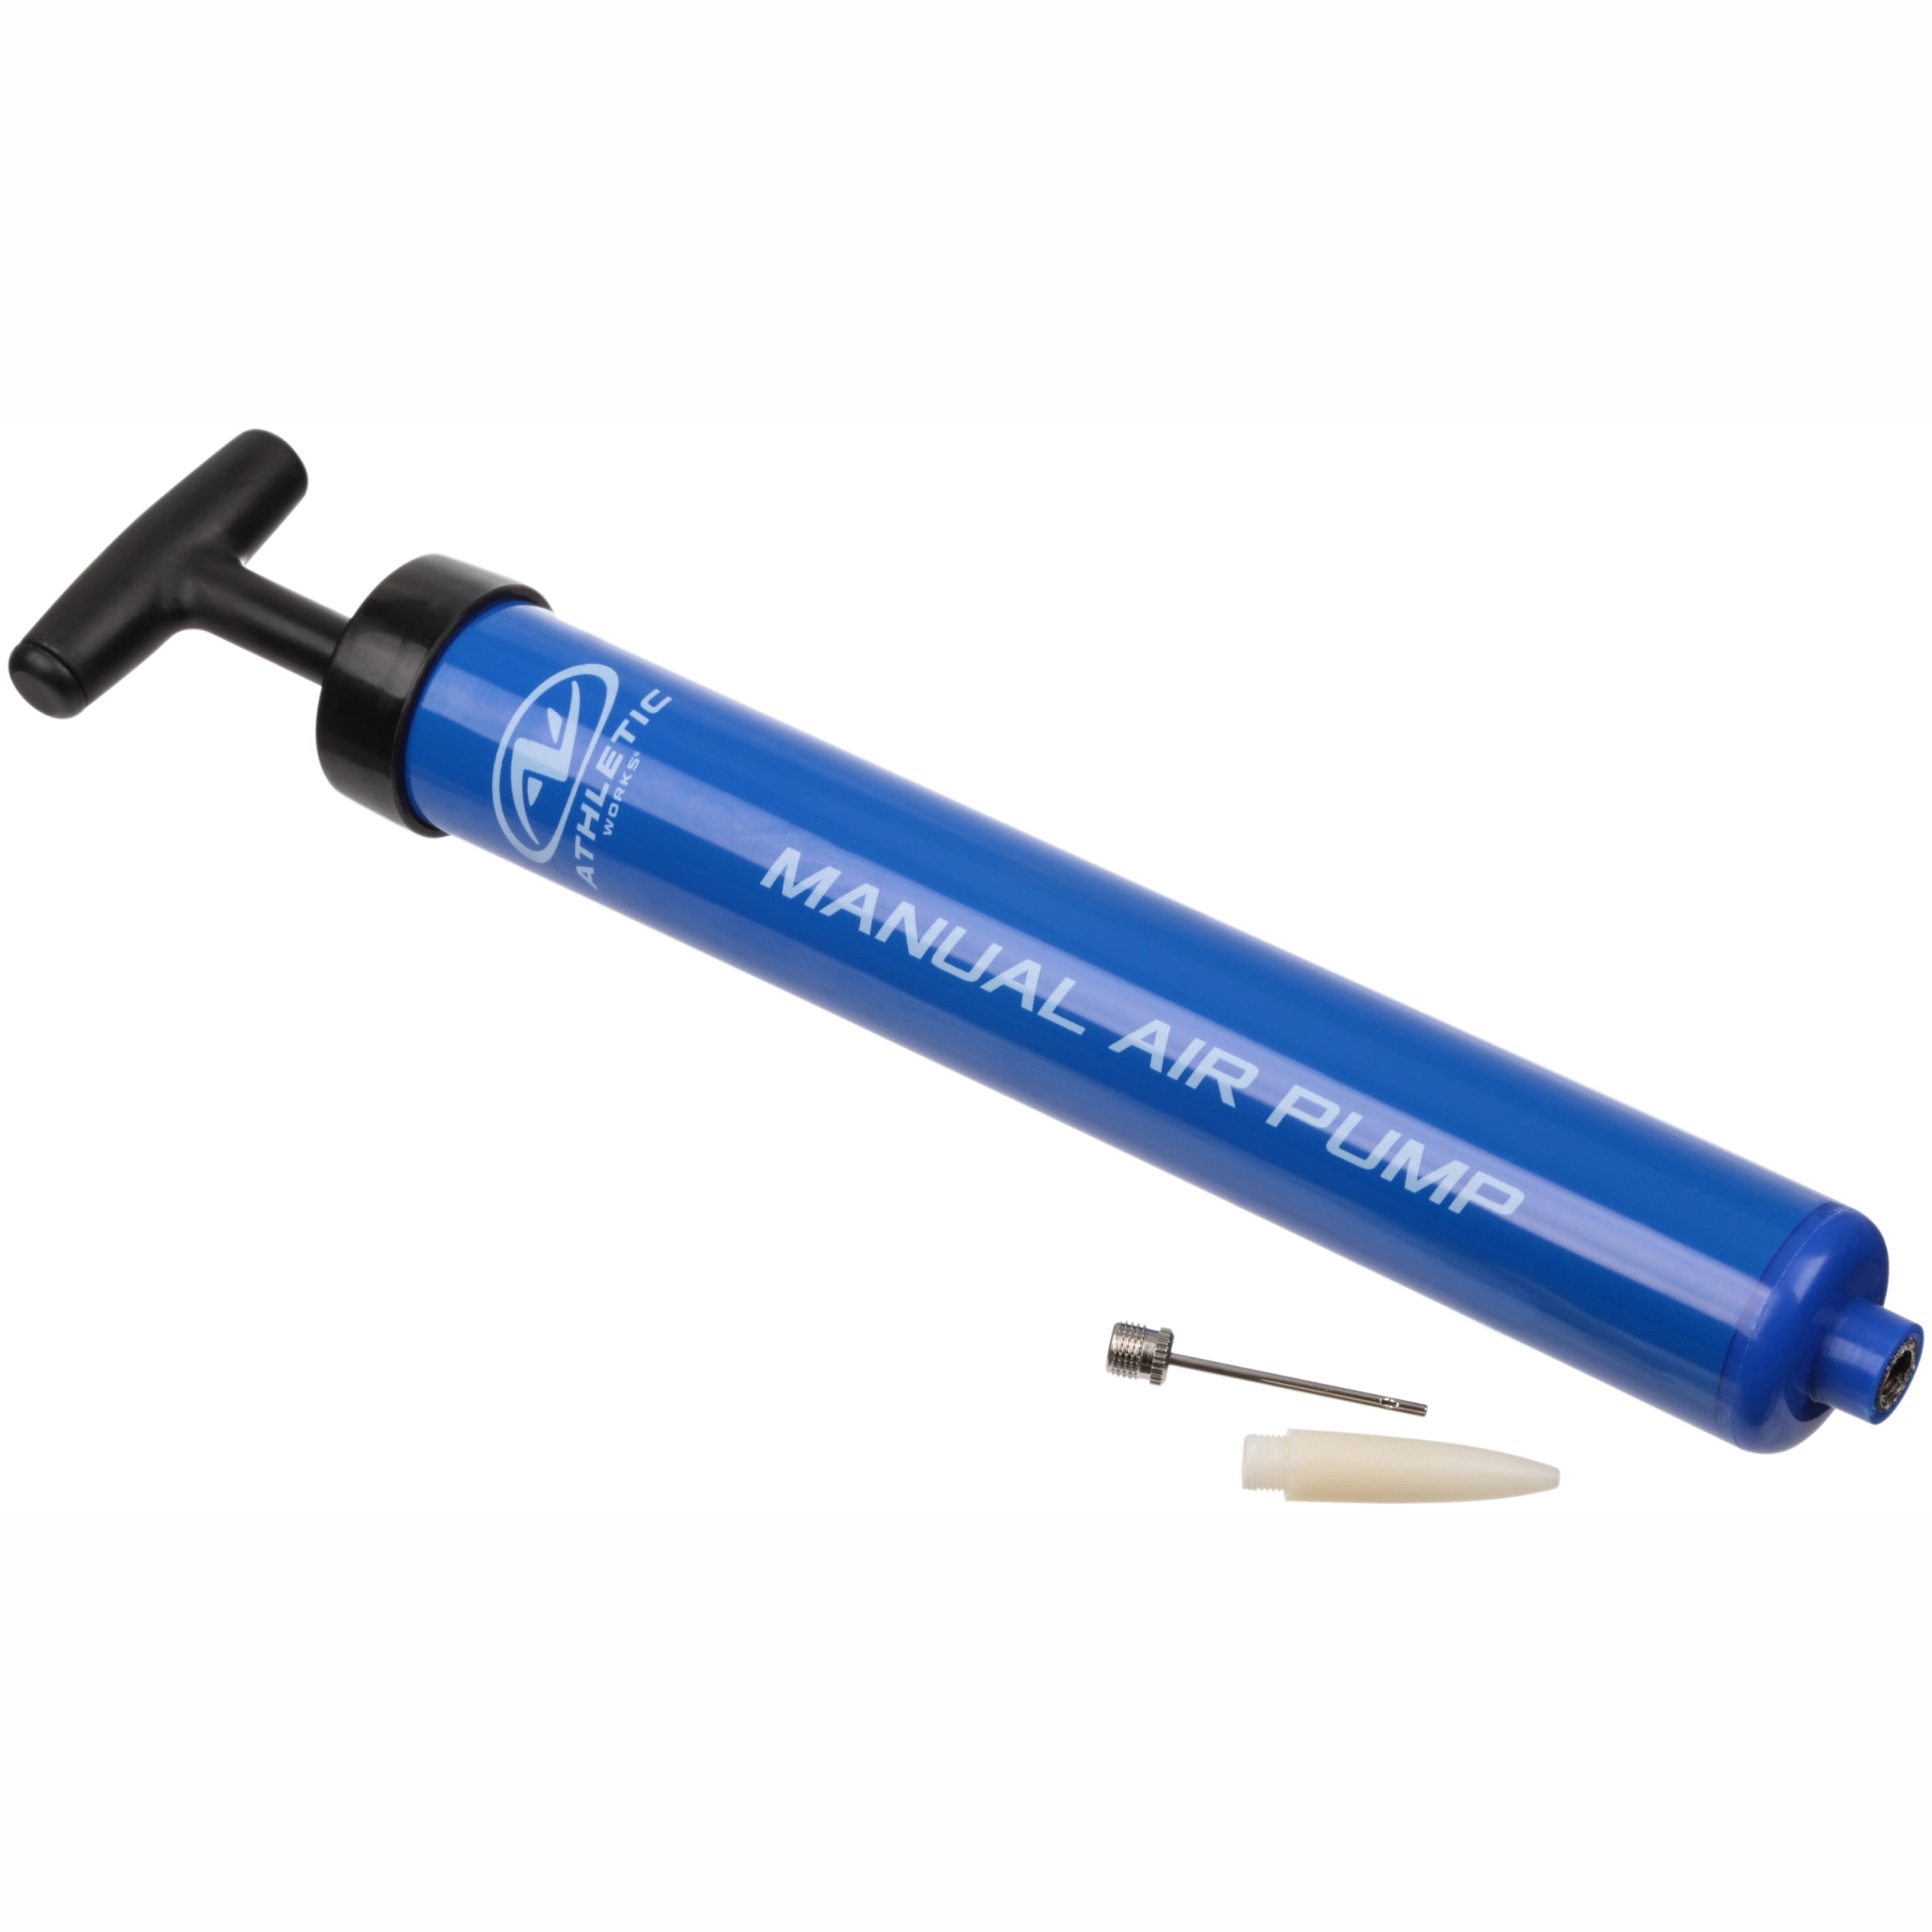 Athletic Works Manual 12 Air Pump with 1 Inflation Needle 1 Adapter, Blue,  Plastic, 0.4 lbs